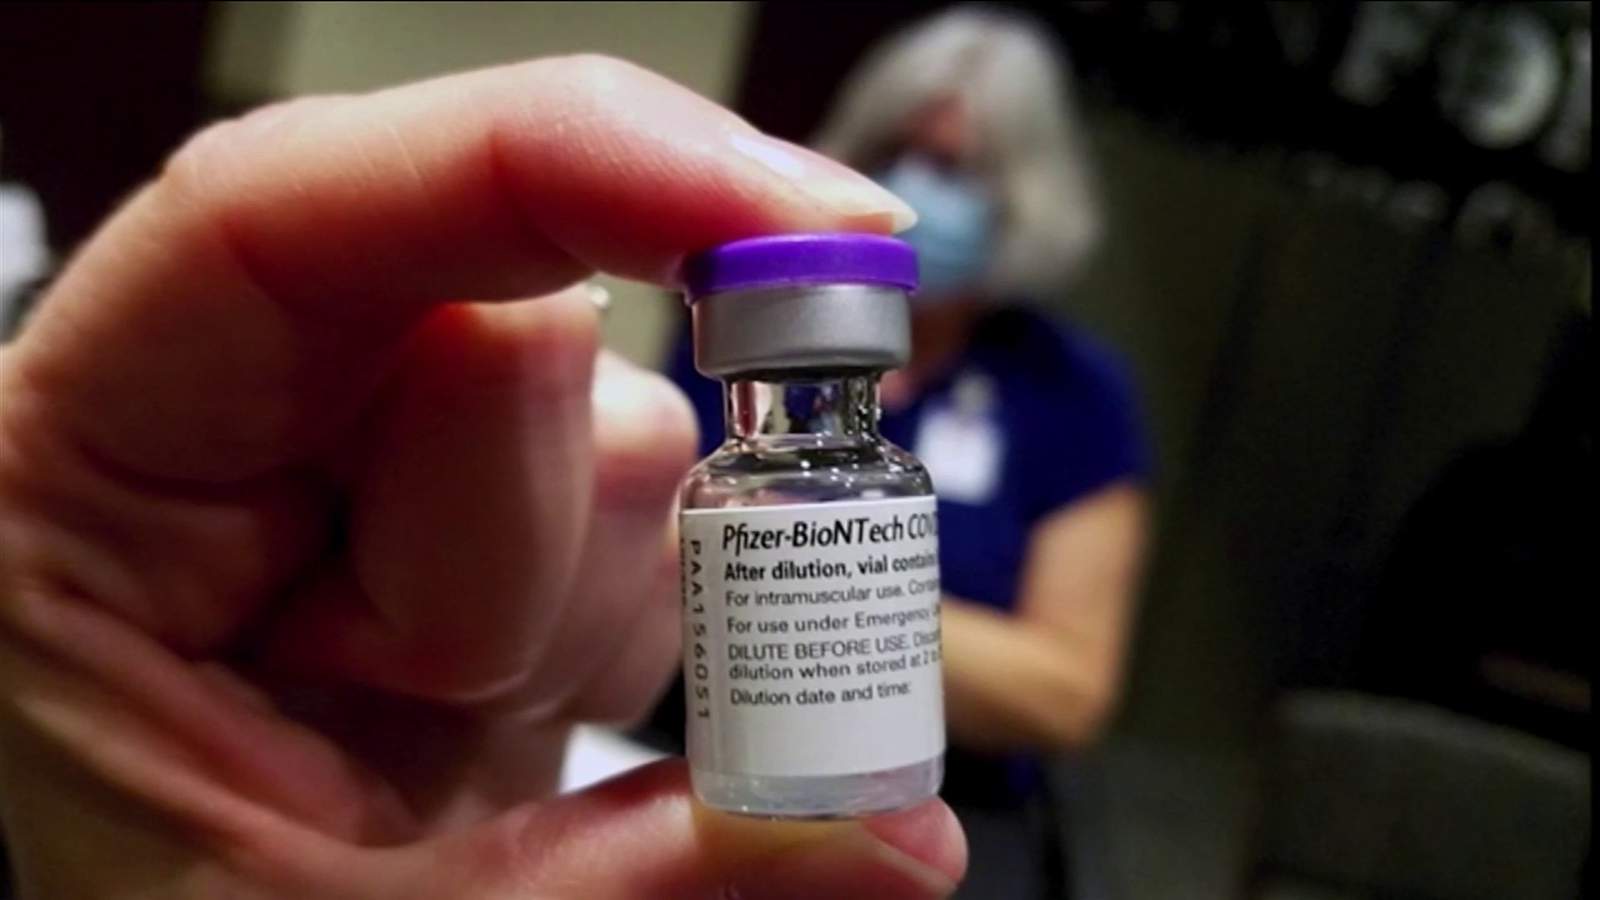 With 1 million Floridians vaccinated, where do COVID-19 cases stand?